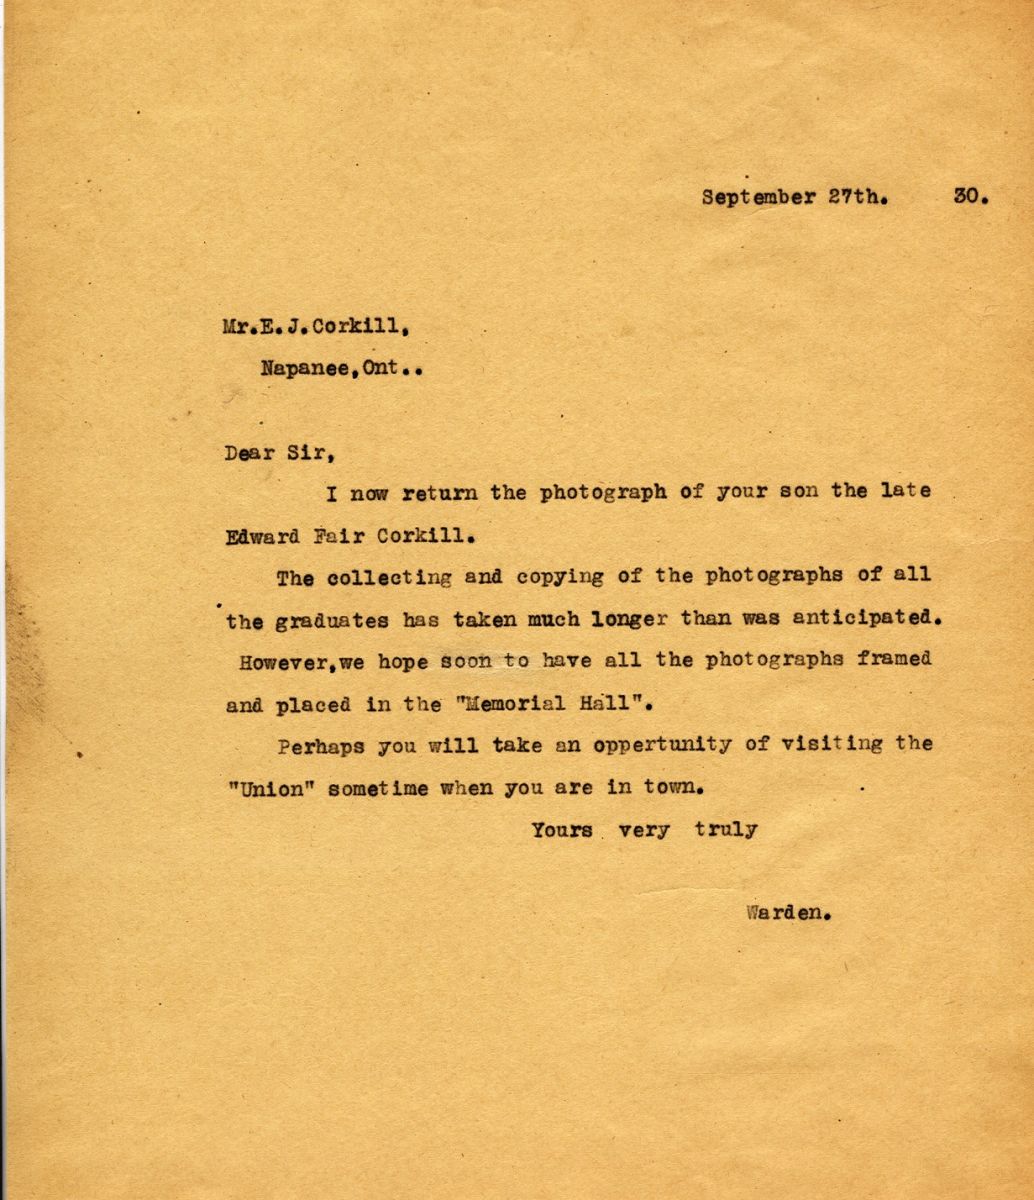 Letter from the Warden to Mr. E.J. Corkill, 27th September 1930